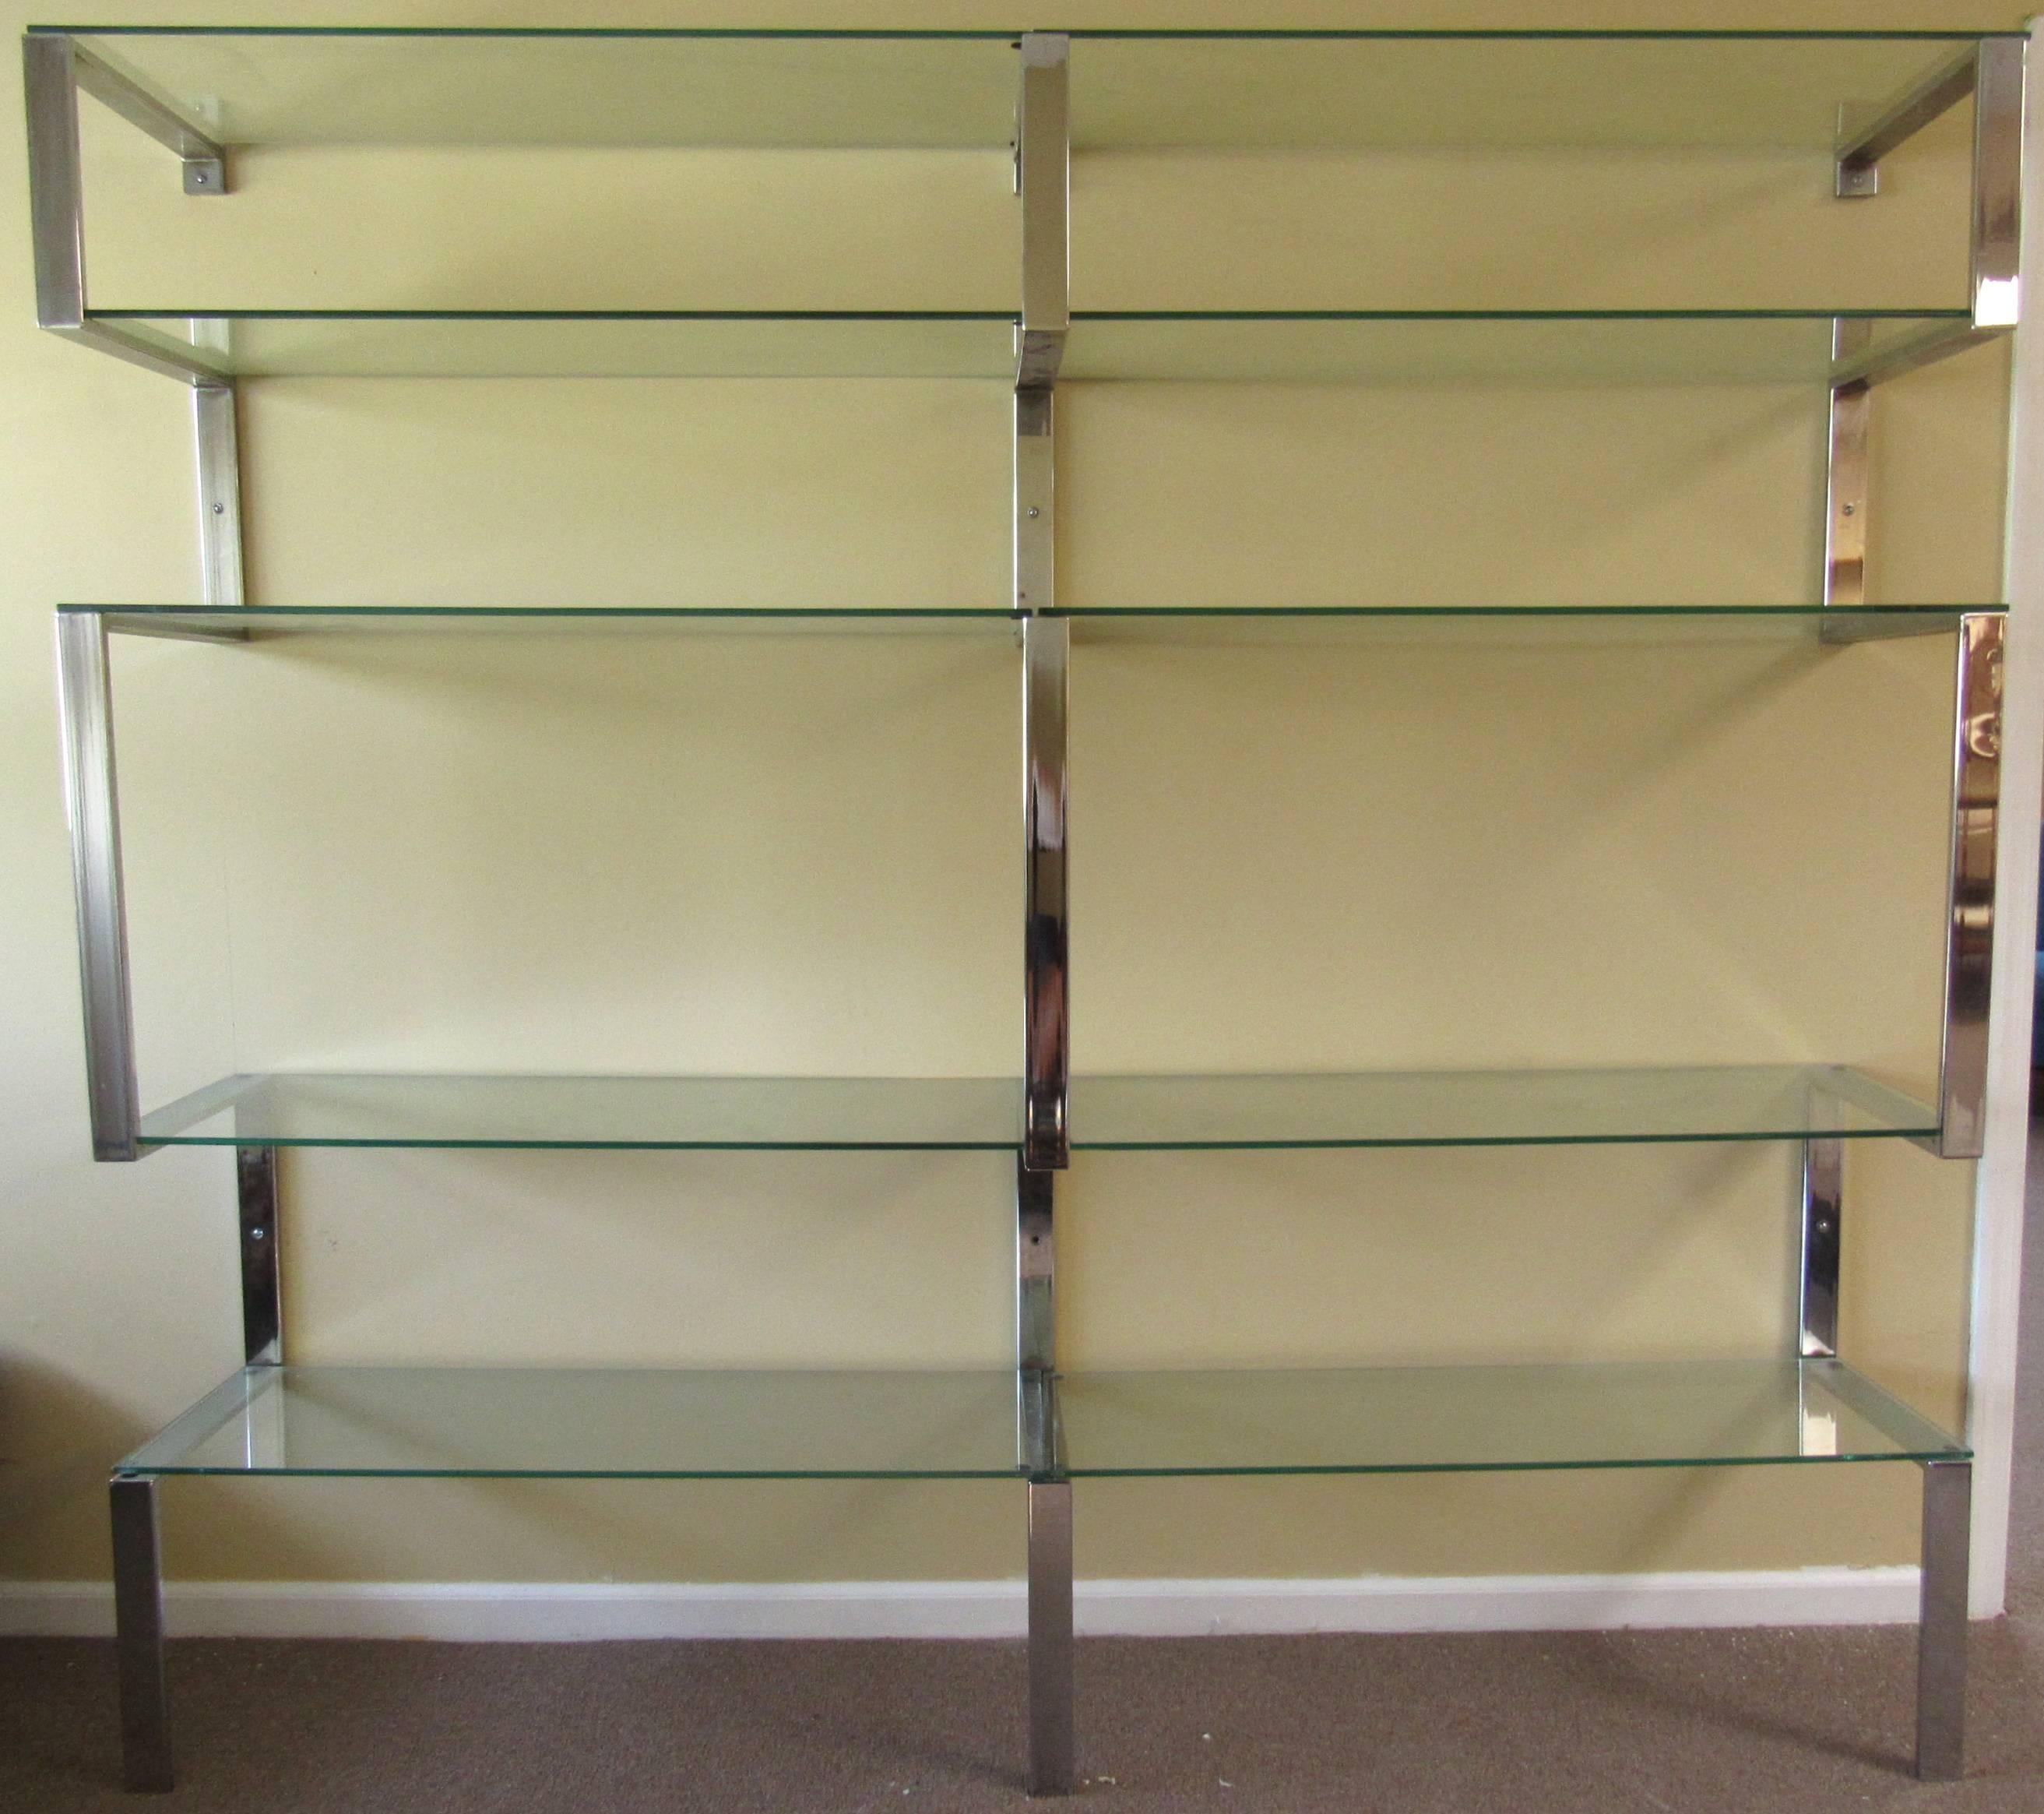 This stylish three-piece chrome finish shelving unit makes a clean modern addition in the style of mid-century designer Milo Baughman. Bent chrome wall shelf secures to support glass shelves, perfect for home or shop display. Please confirm item